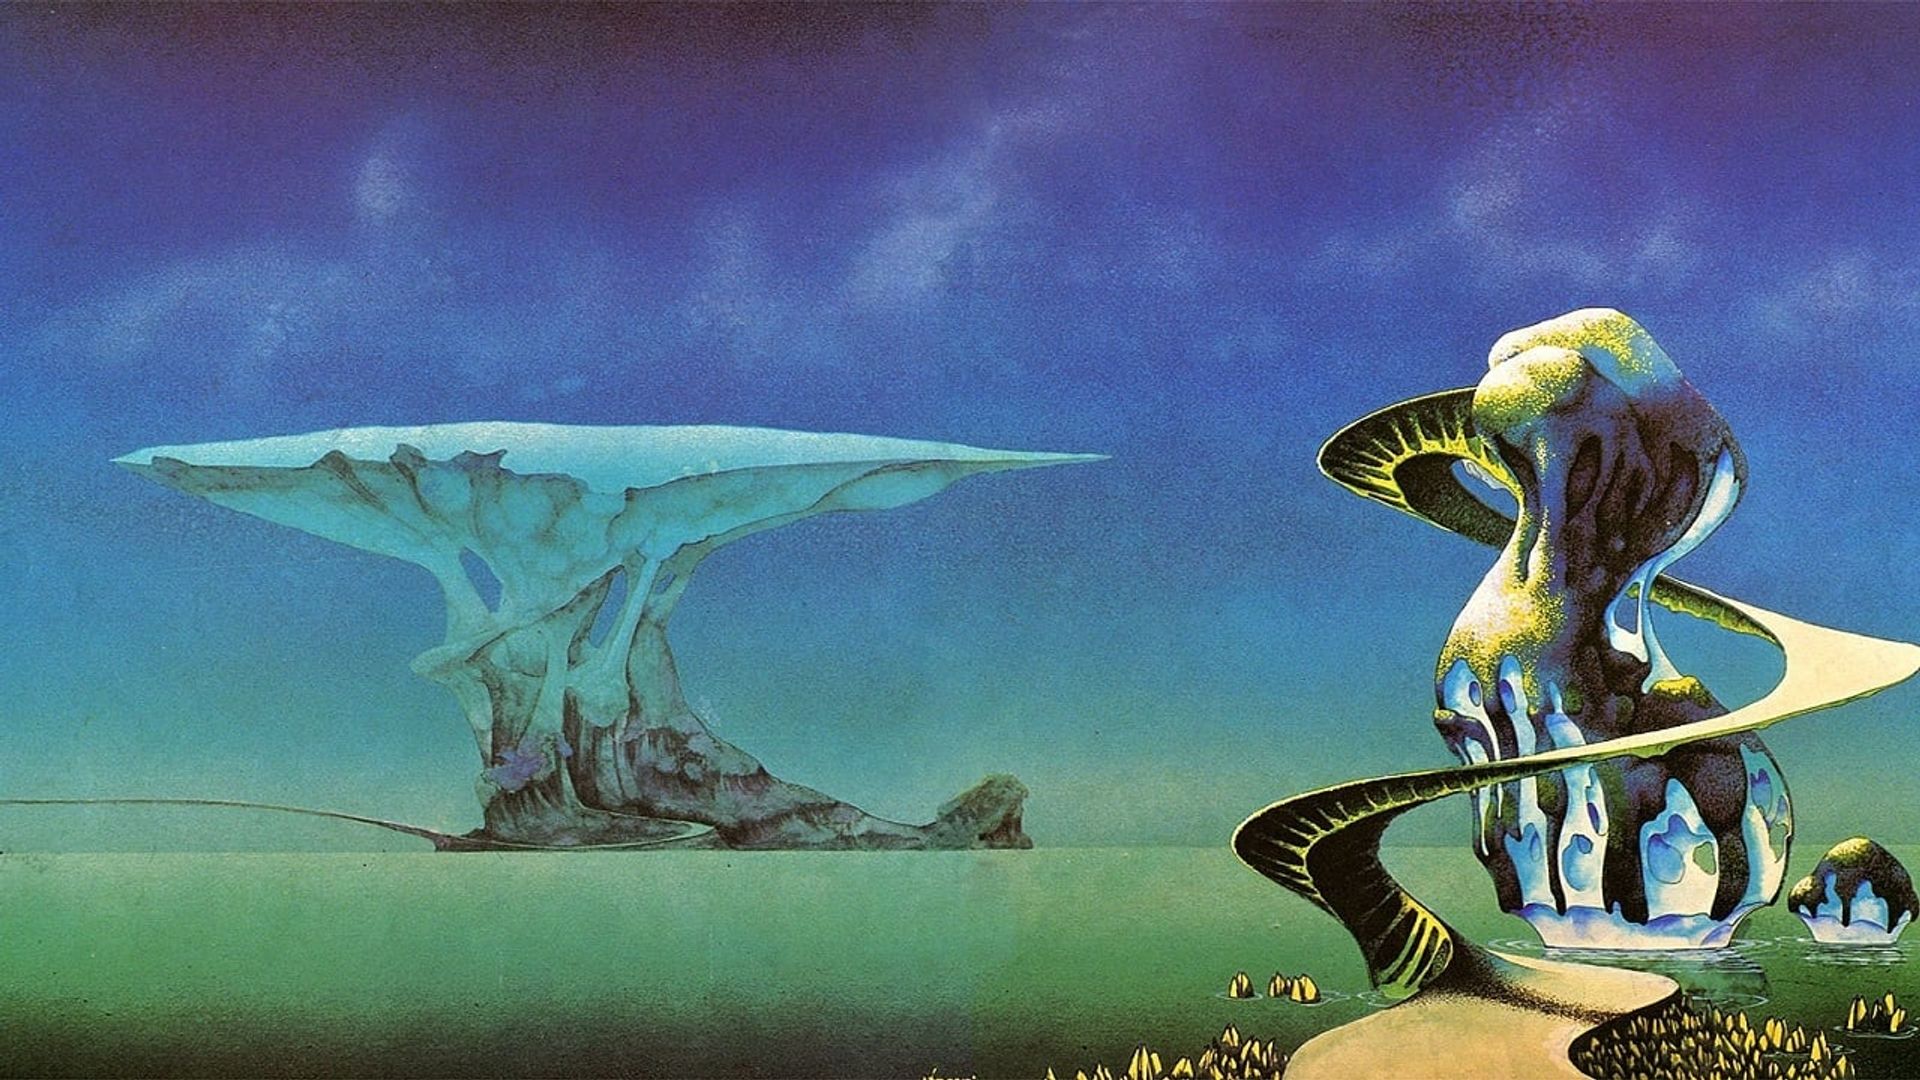 Yessongs background